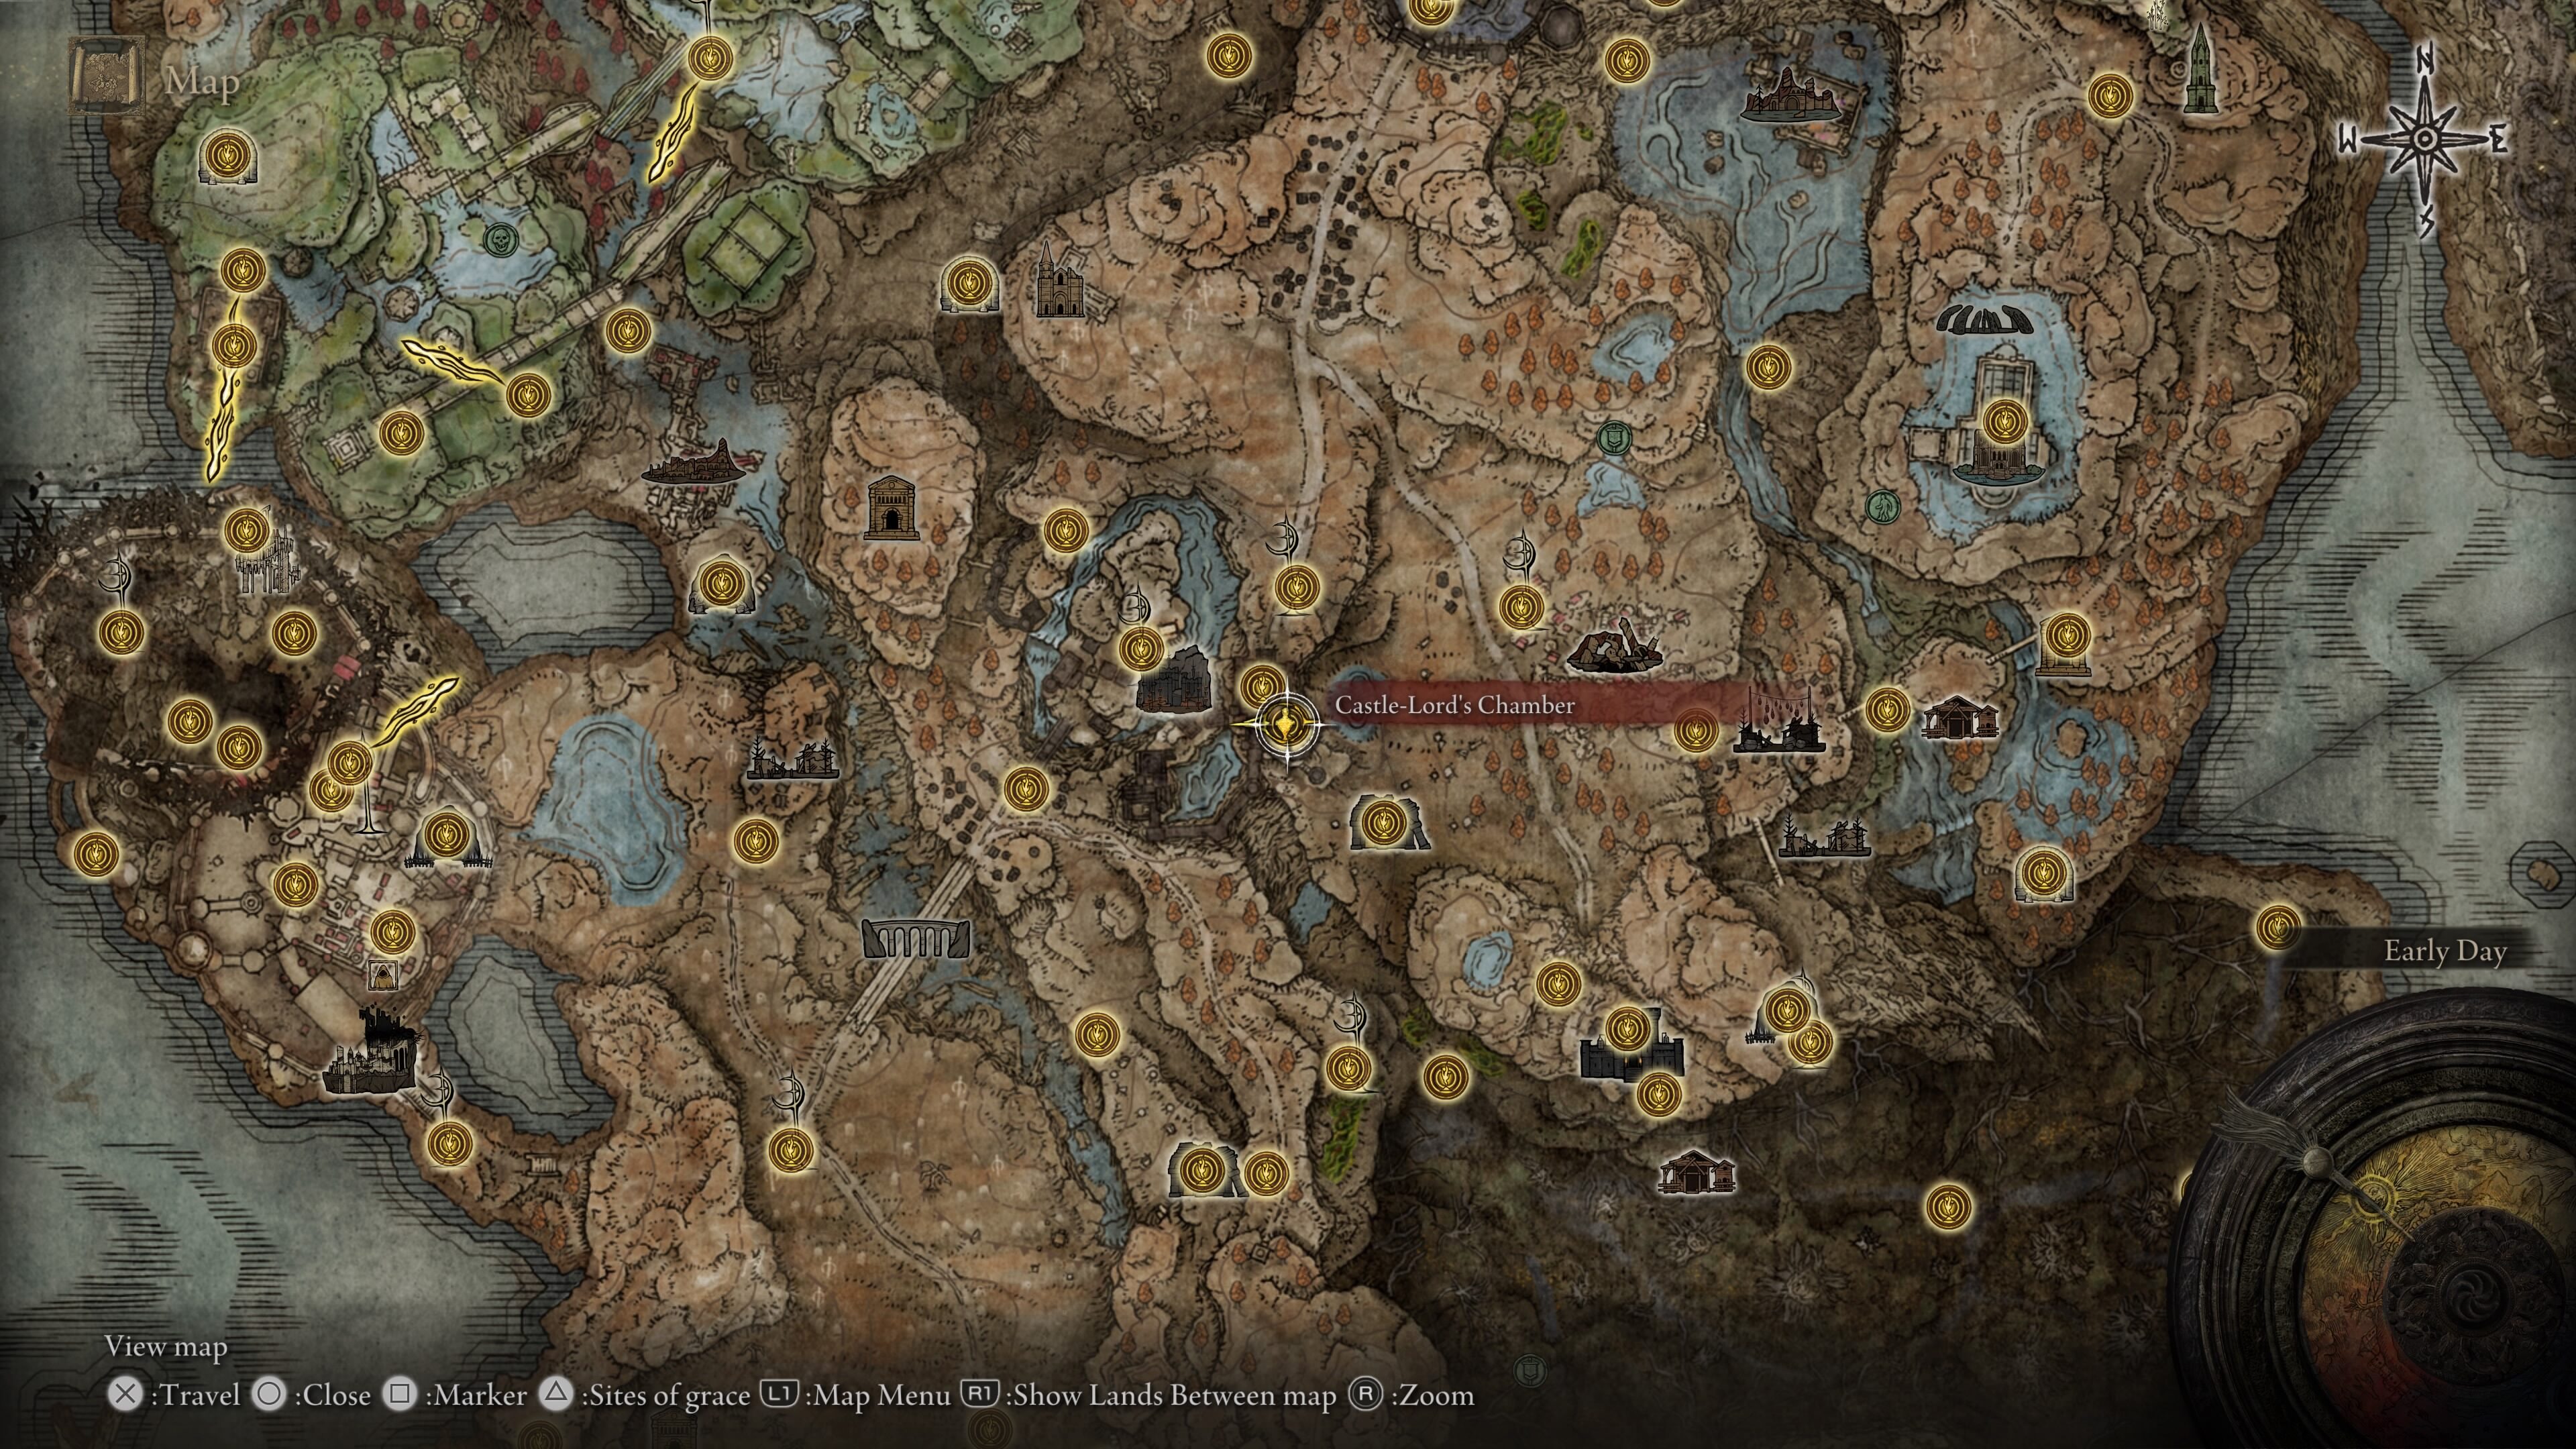 elden ring rellana boss guide - the map from the game showing rellana's location